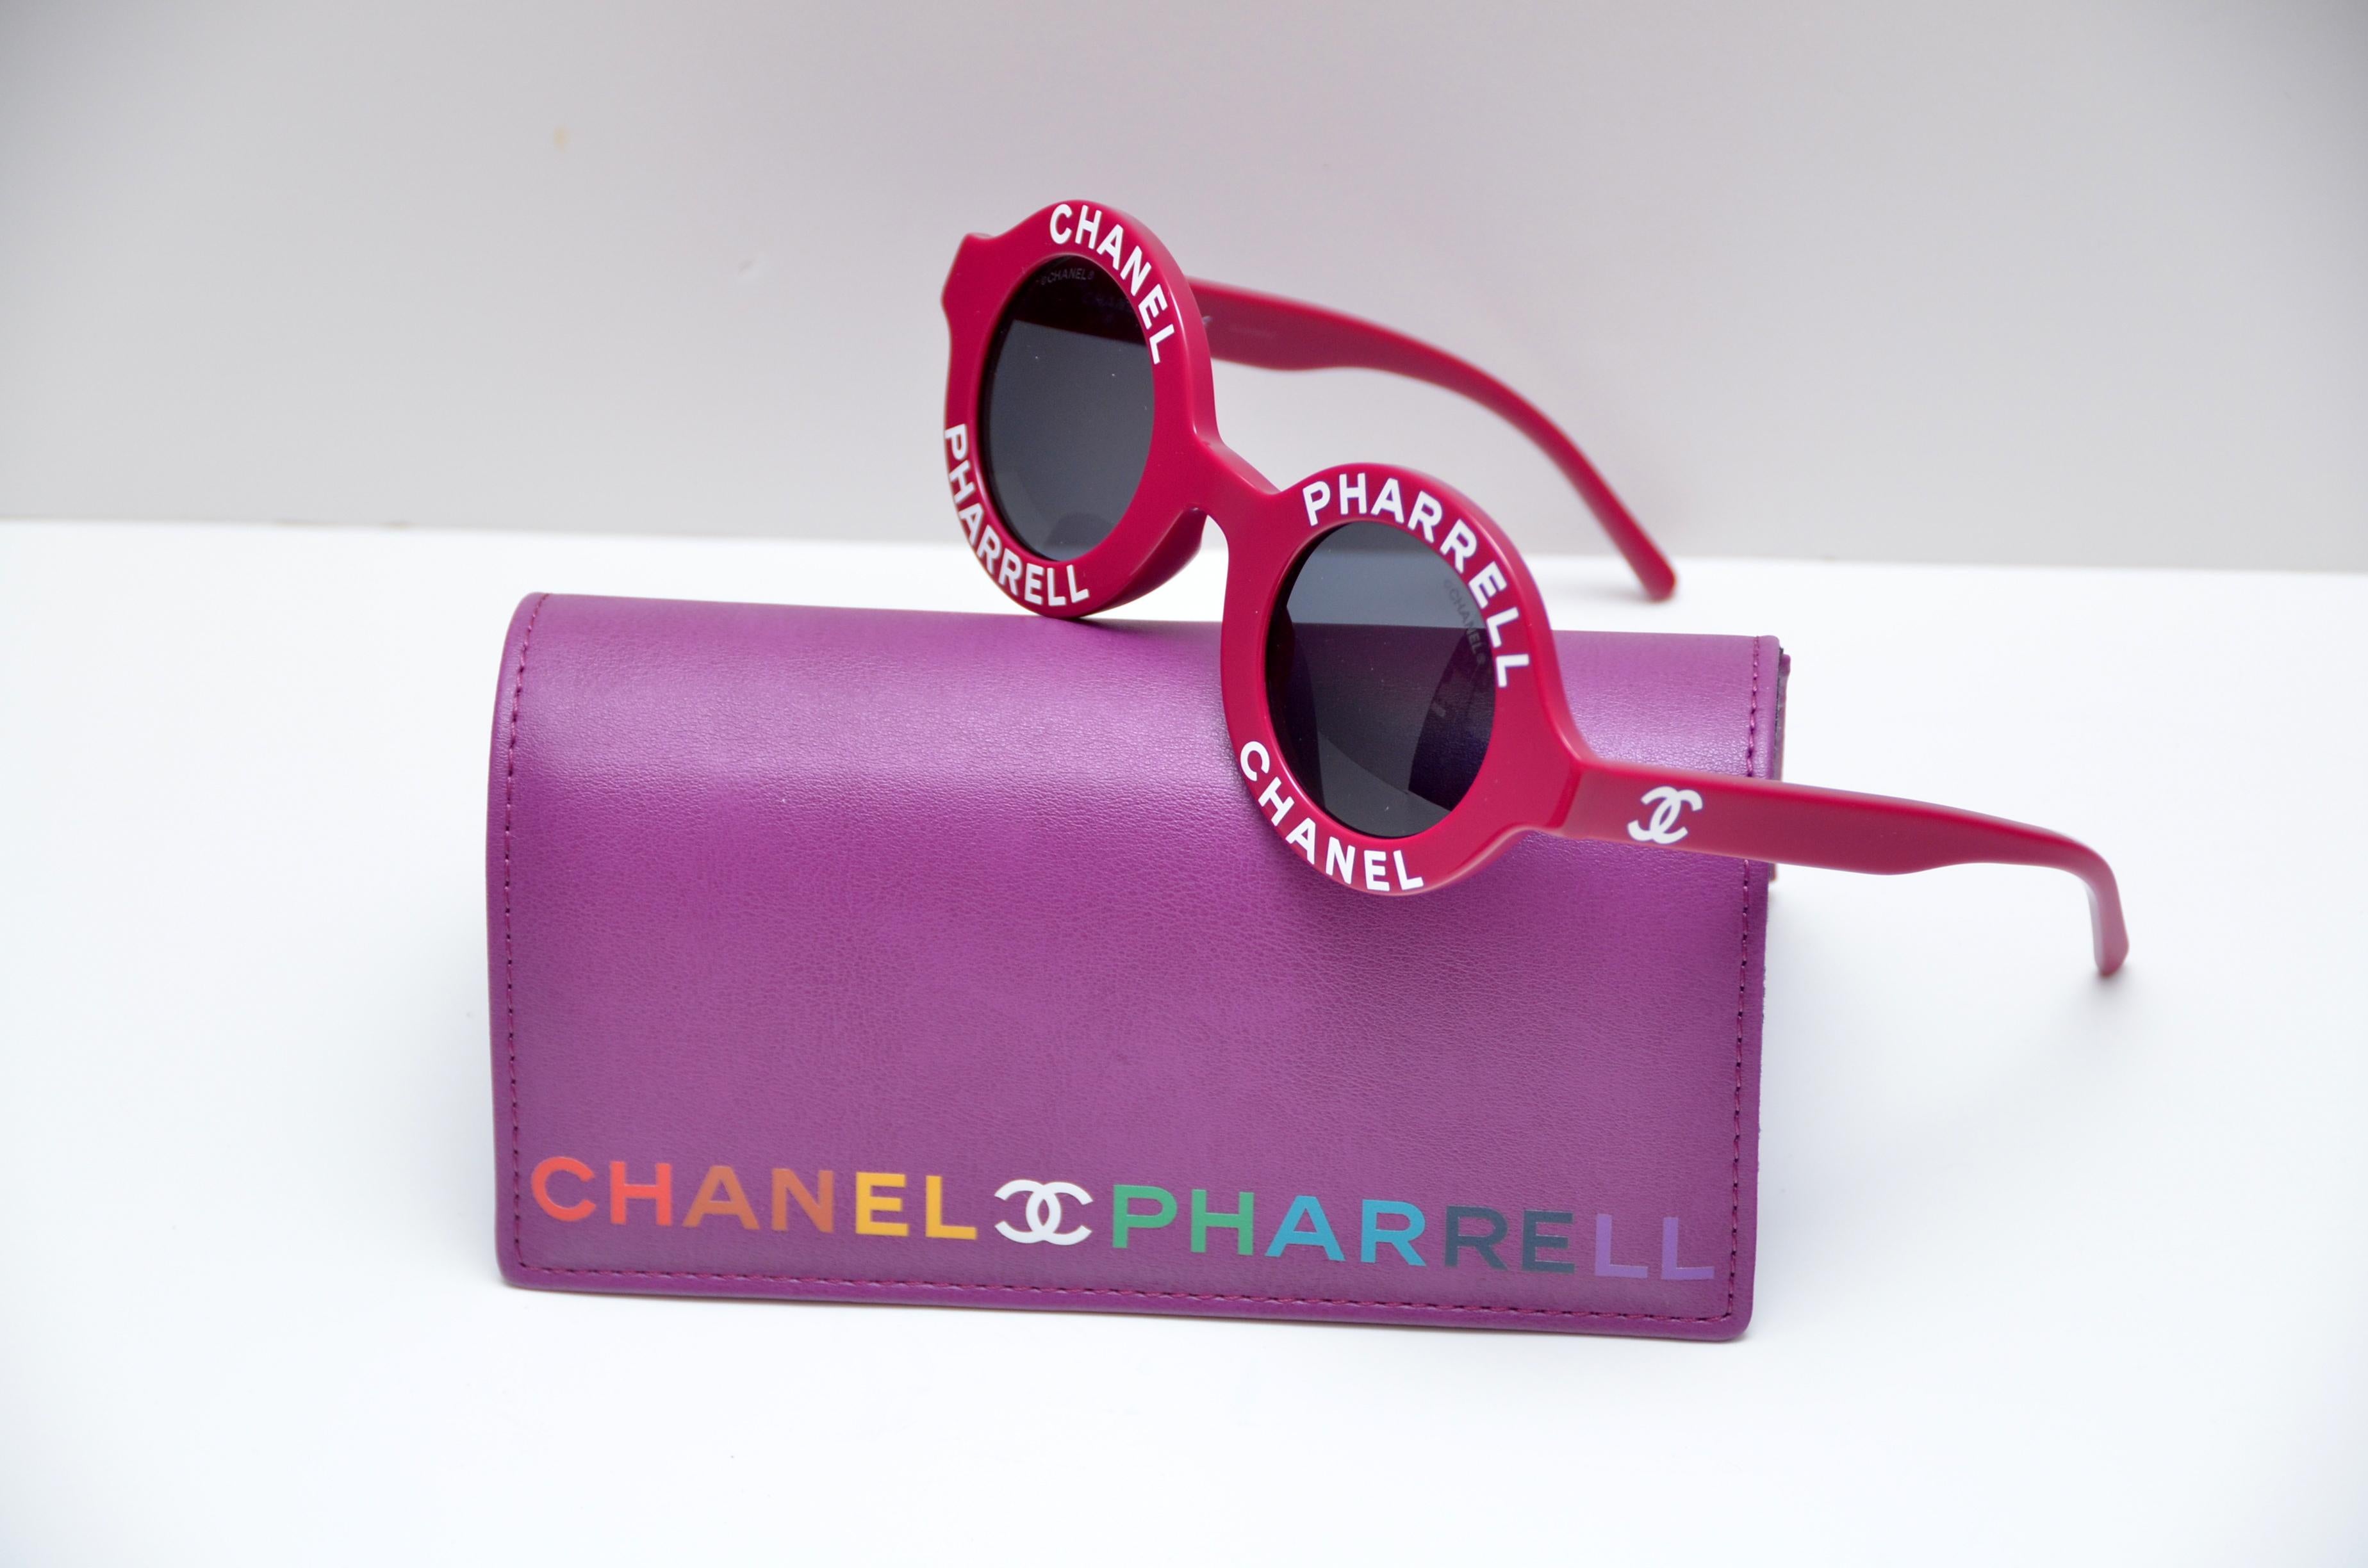 100% guaranteed authentic Chanel x Pharrell Capsule Collection Sunglasses .  
An urban capsule collection highlighting Pharrell Williams’ longterm relationship with the House of Chanel and initiated by Karl Lagerfeld .  
Color : Violet 
Please